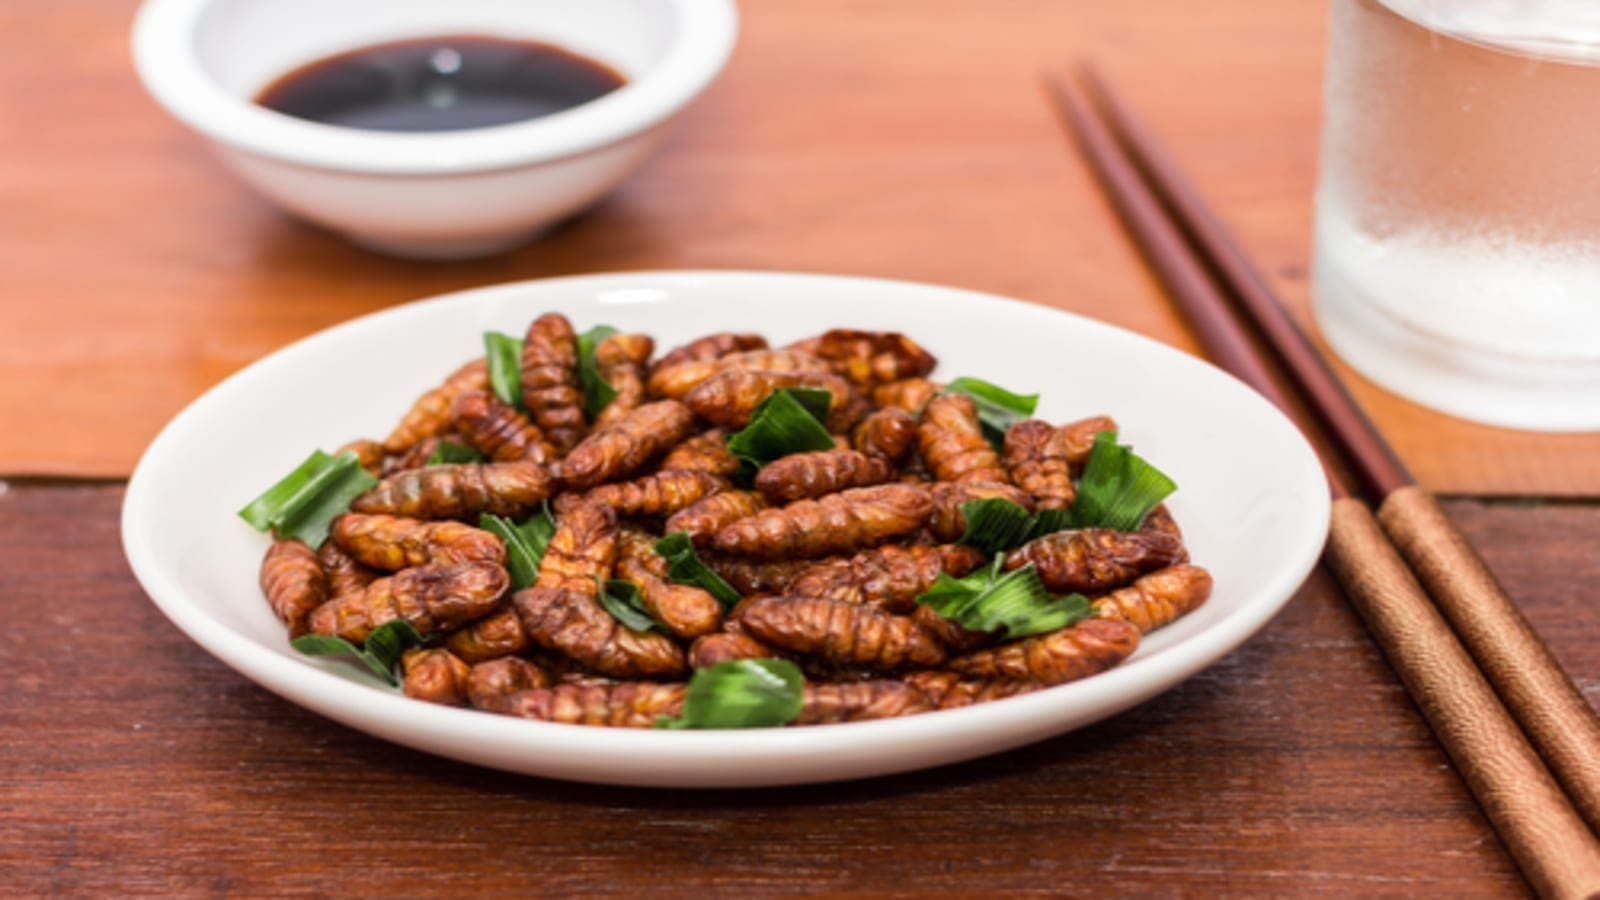 ValuSect unveils program to support European bug businesses amid rising demand for insect foods